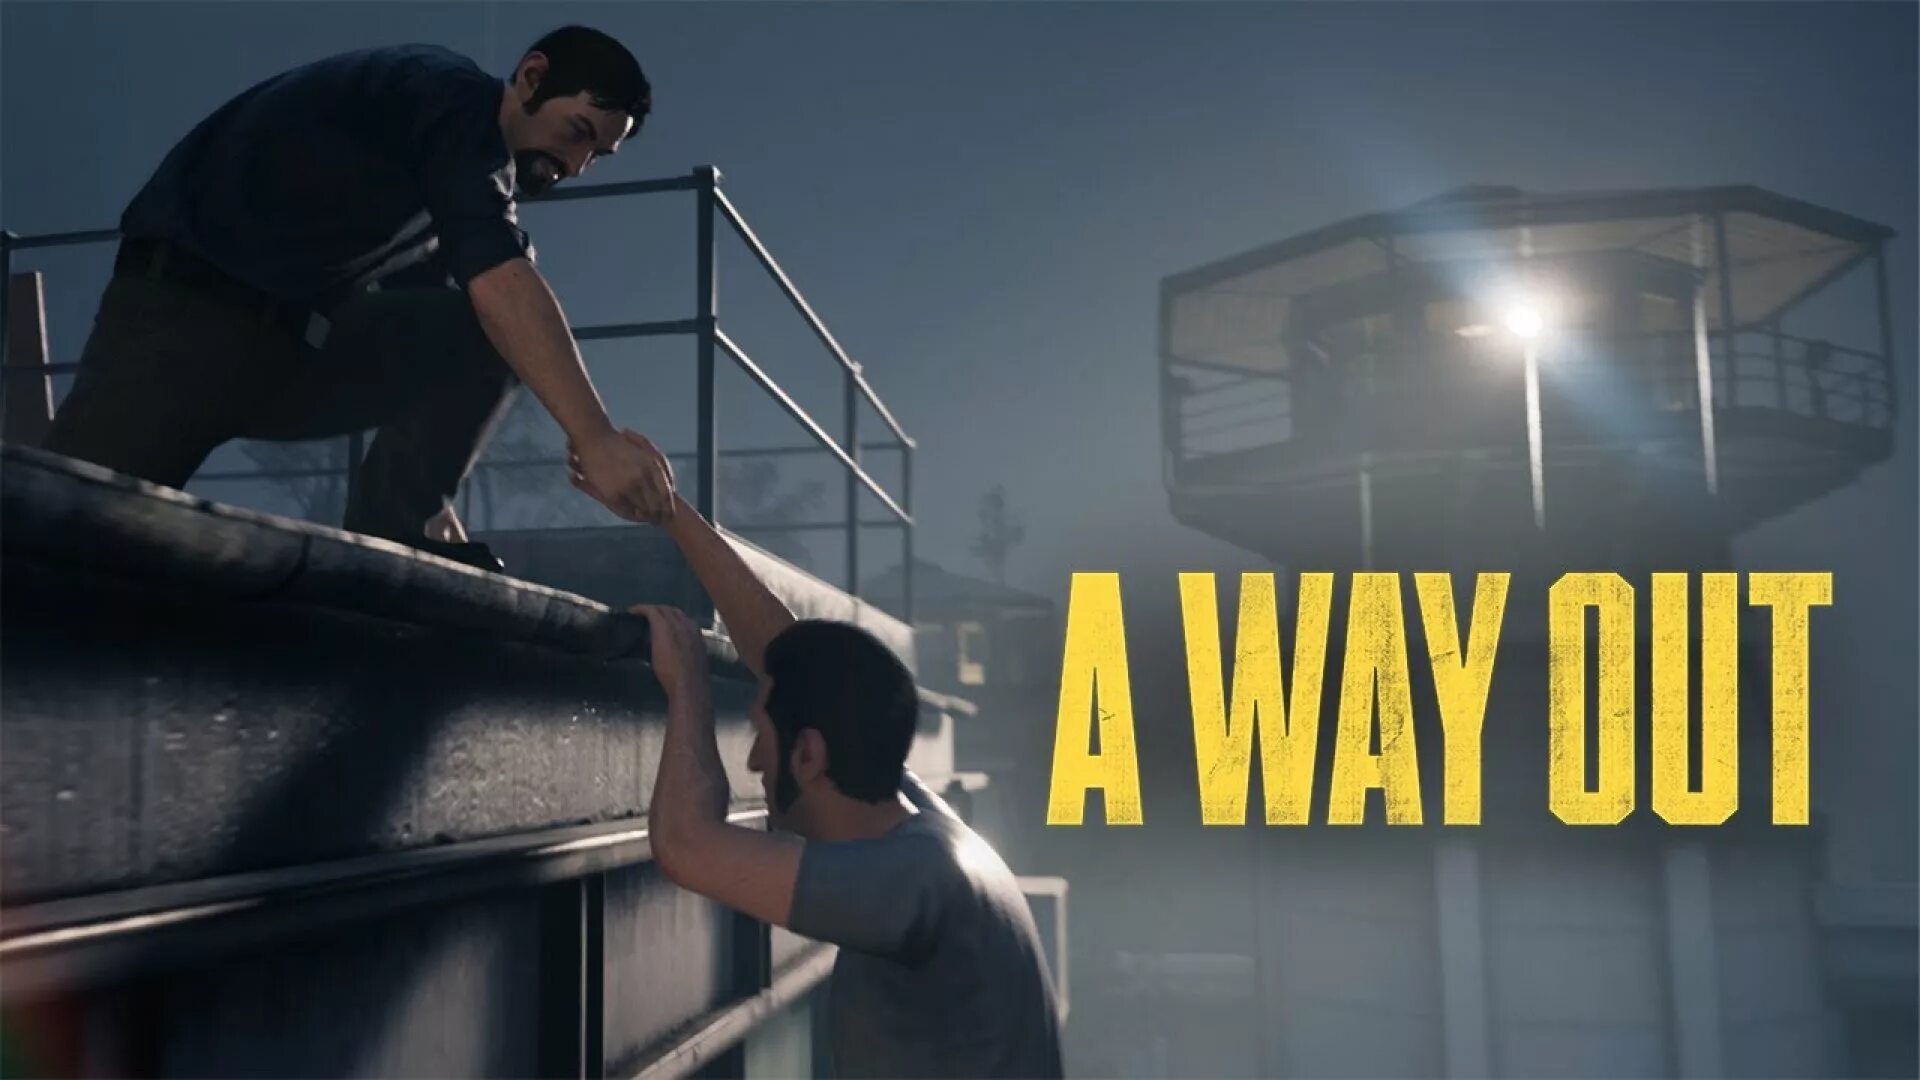 Way out игра. Побег из тюрьмы a way out. А Wаy оut игра. A way AOT. A way out game